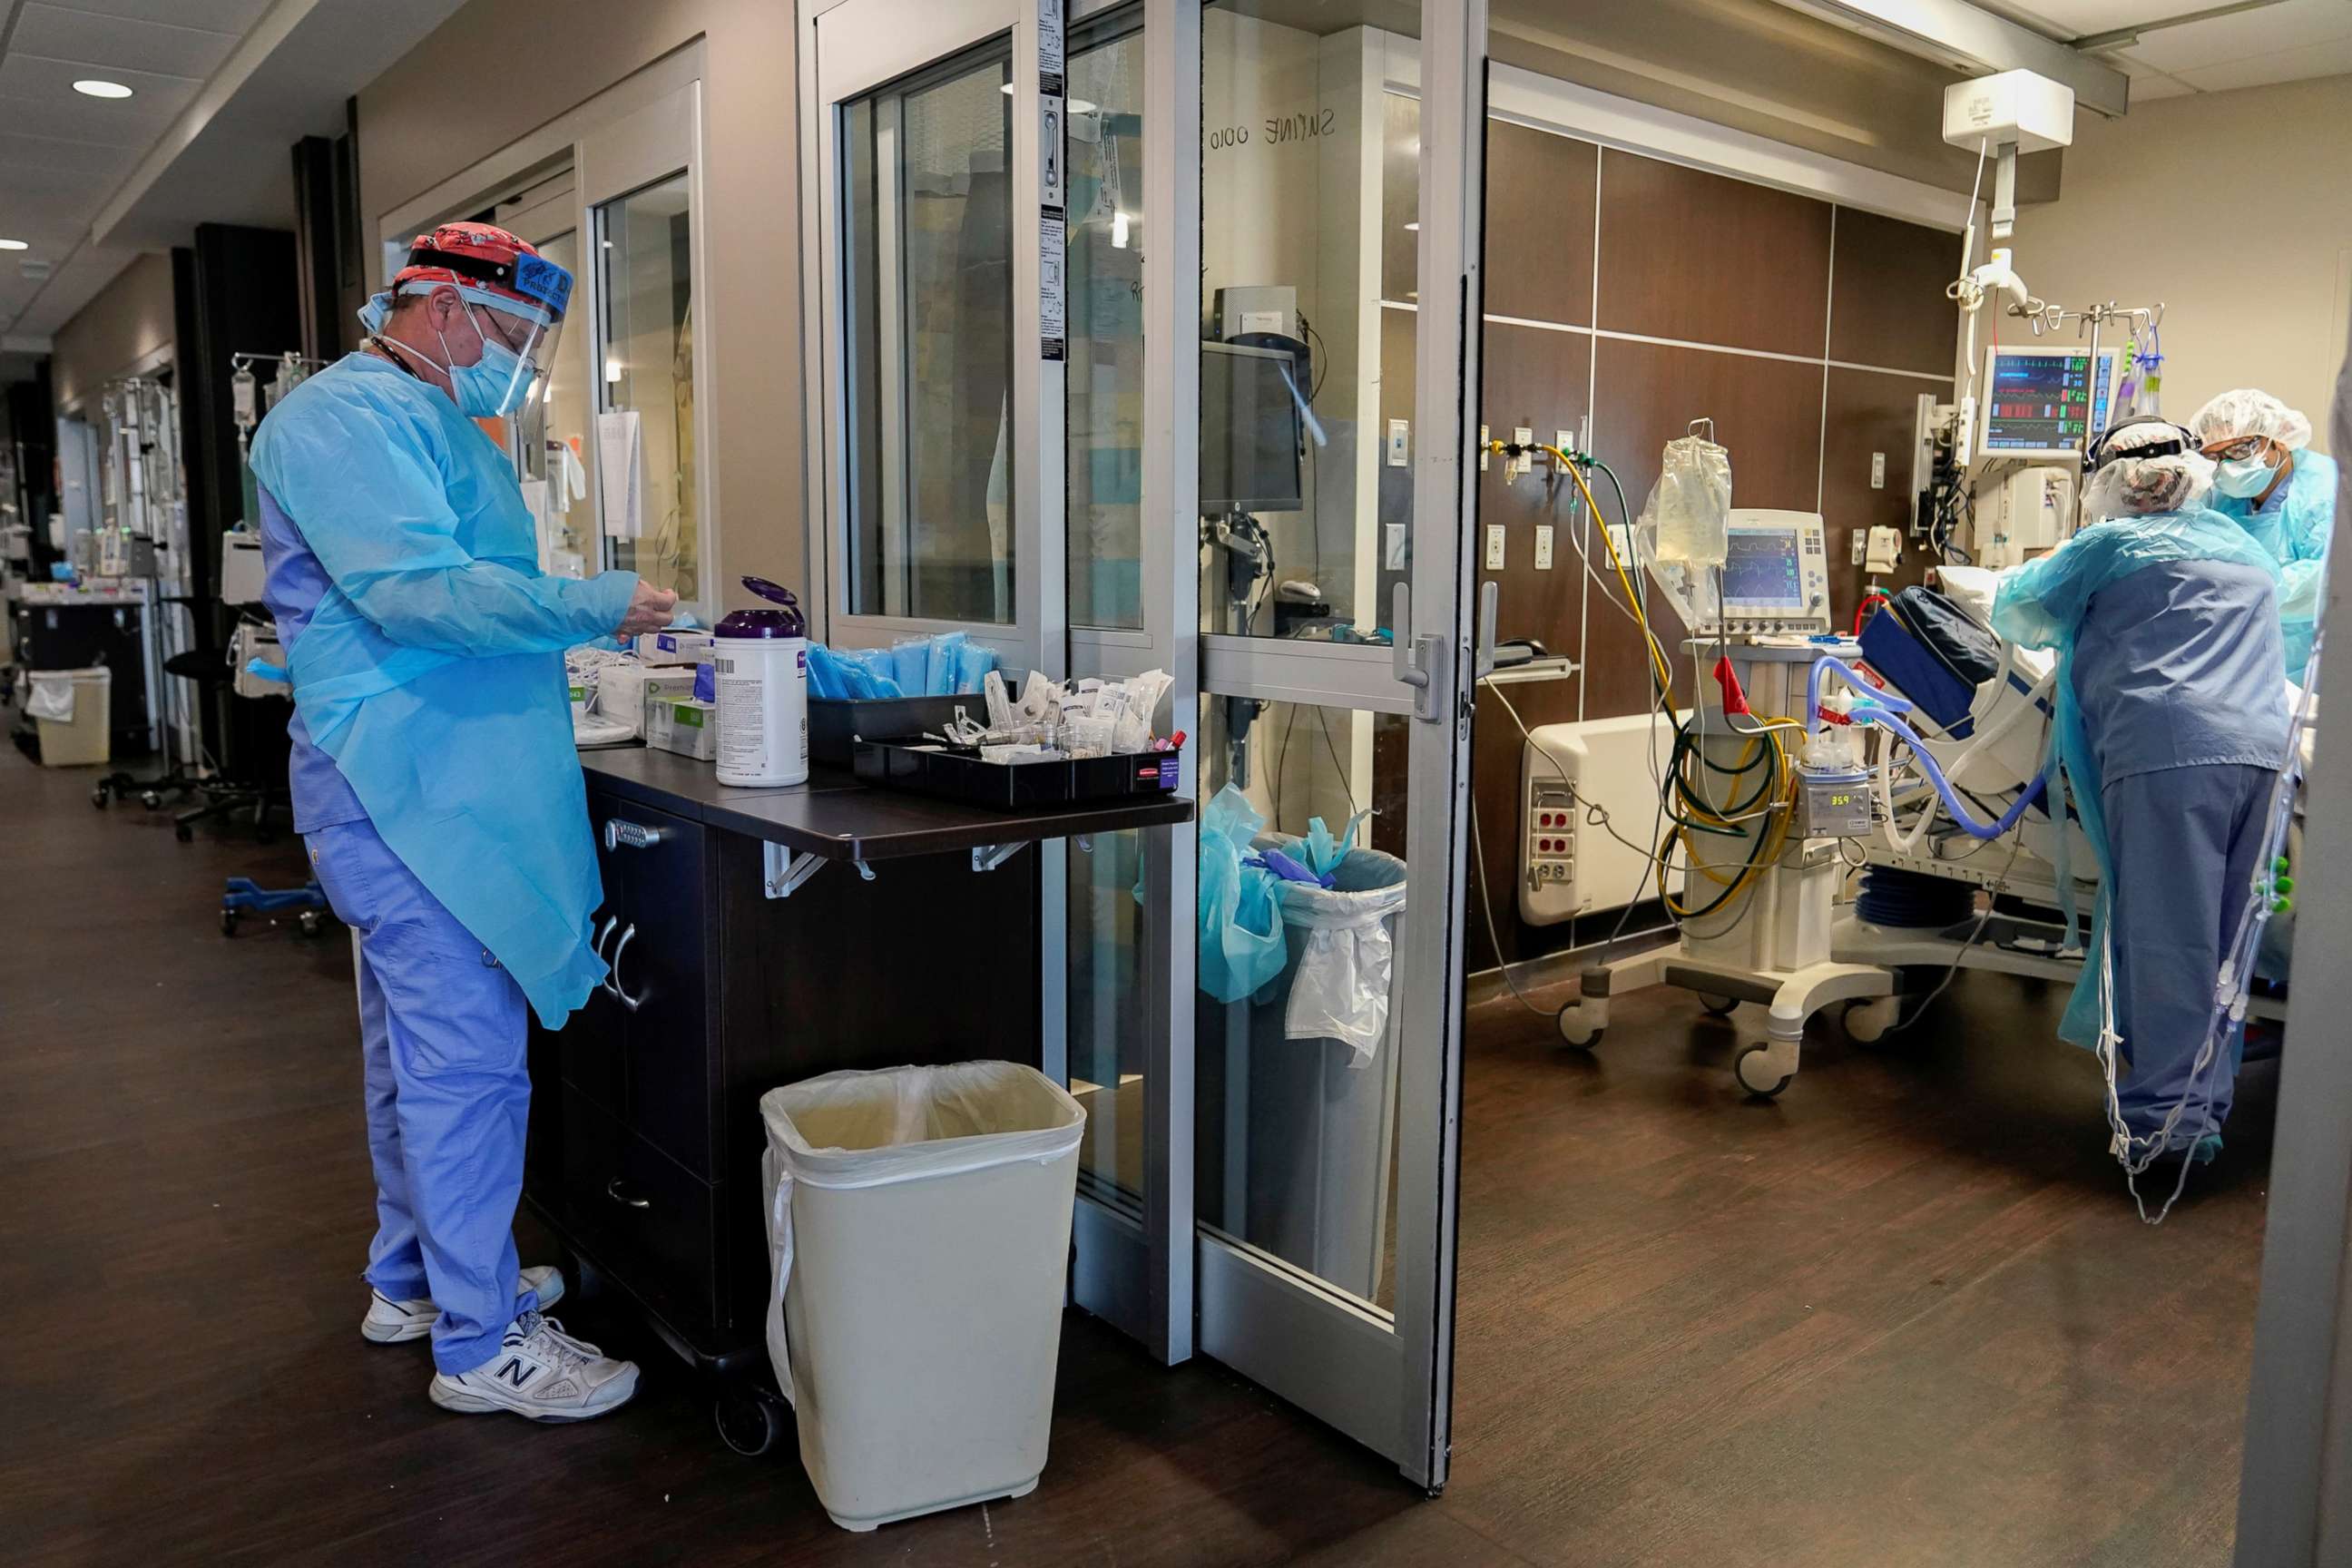 PHOTO: Nurses treat a COVID-19 patient in the ICU at SSM Health St. Anthony Hospital in Oklahoma City, Jan. 28, 2021.